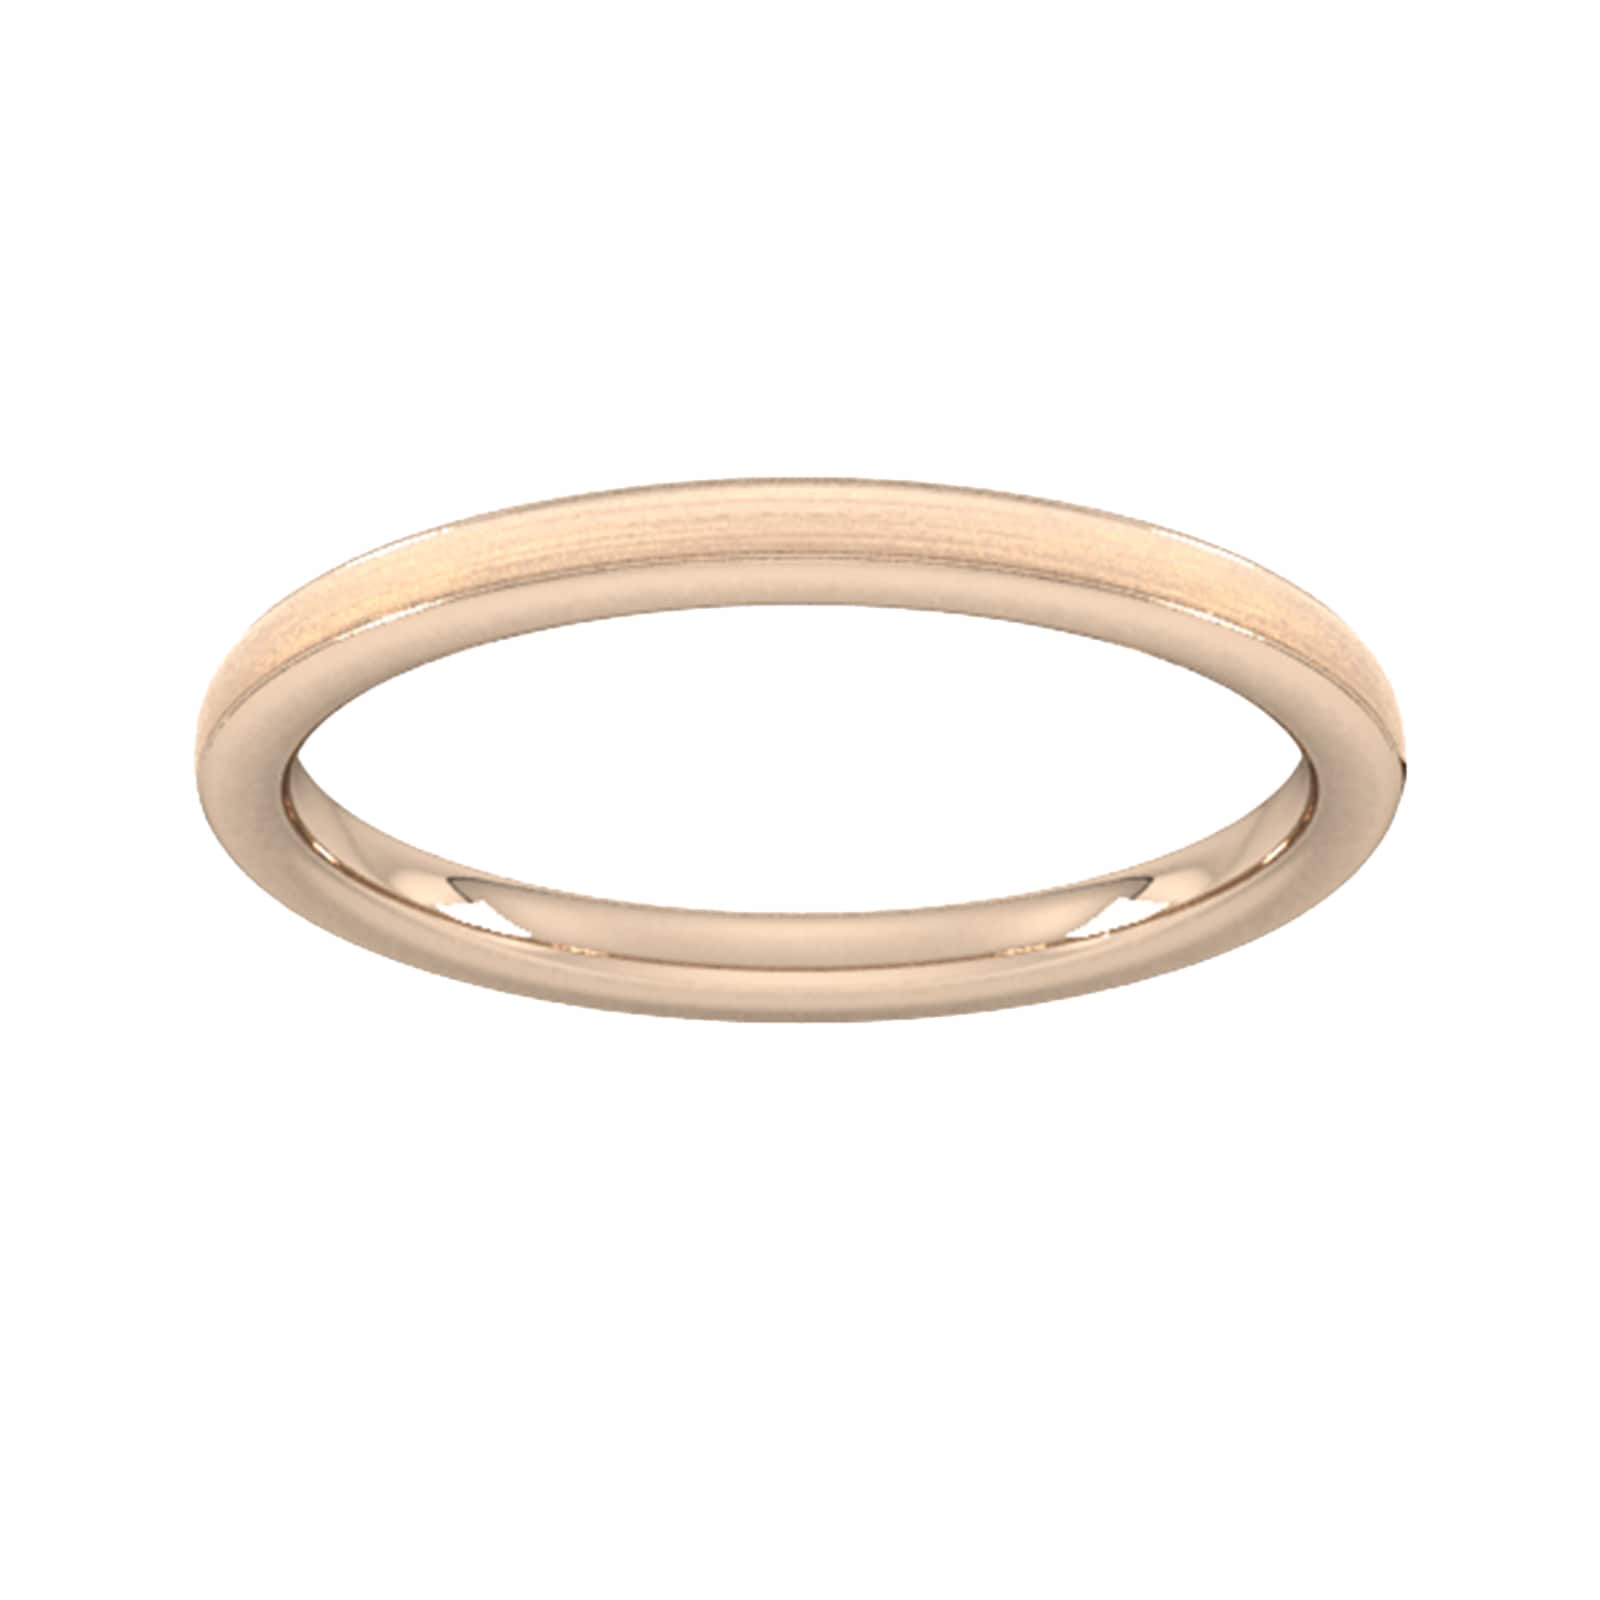 2mm Traditional Court Standard Matt Centre With Grooves Wedding Ring In 18 Carat Rose Gold - Ring Size U